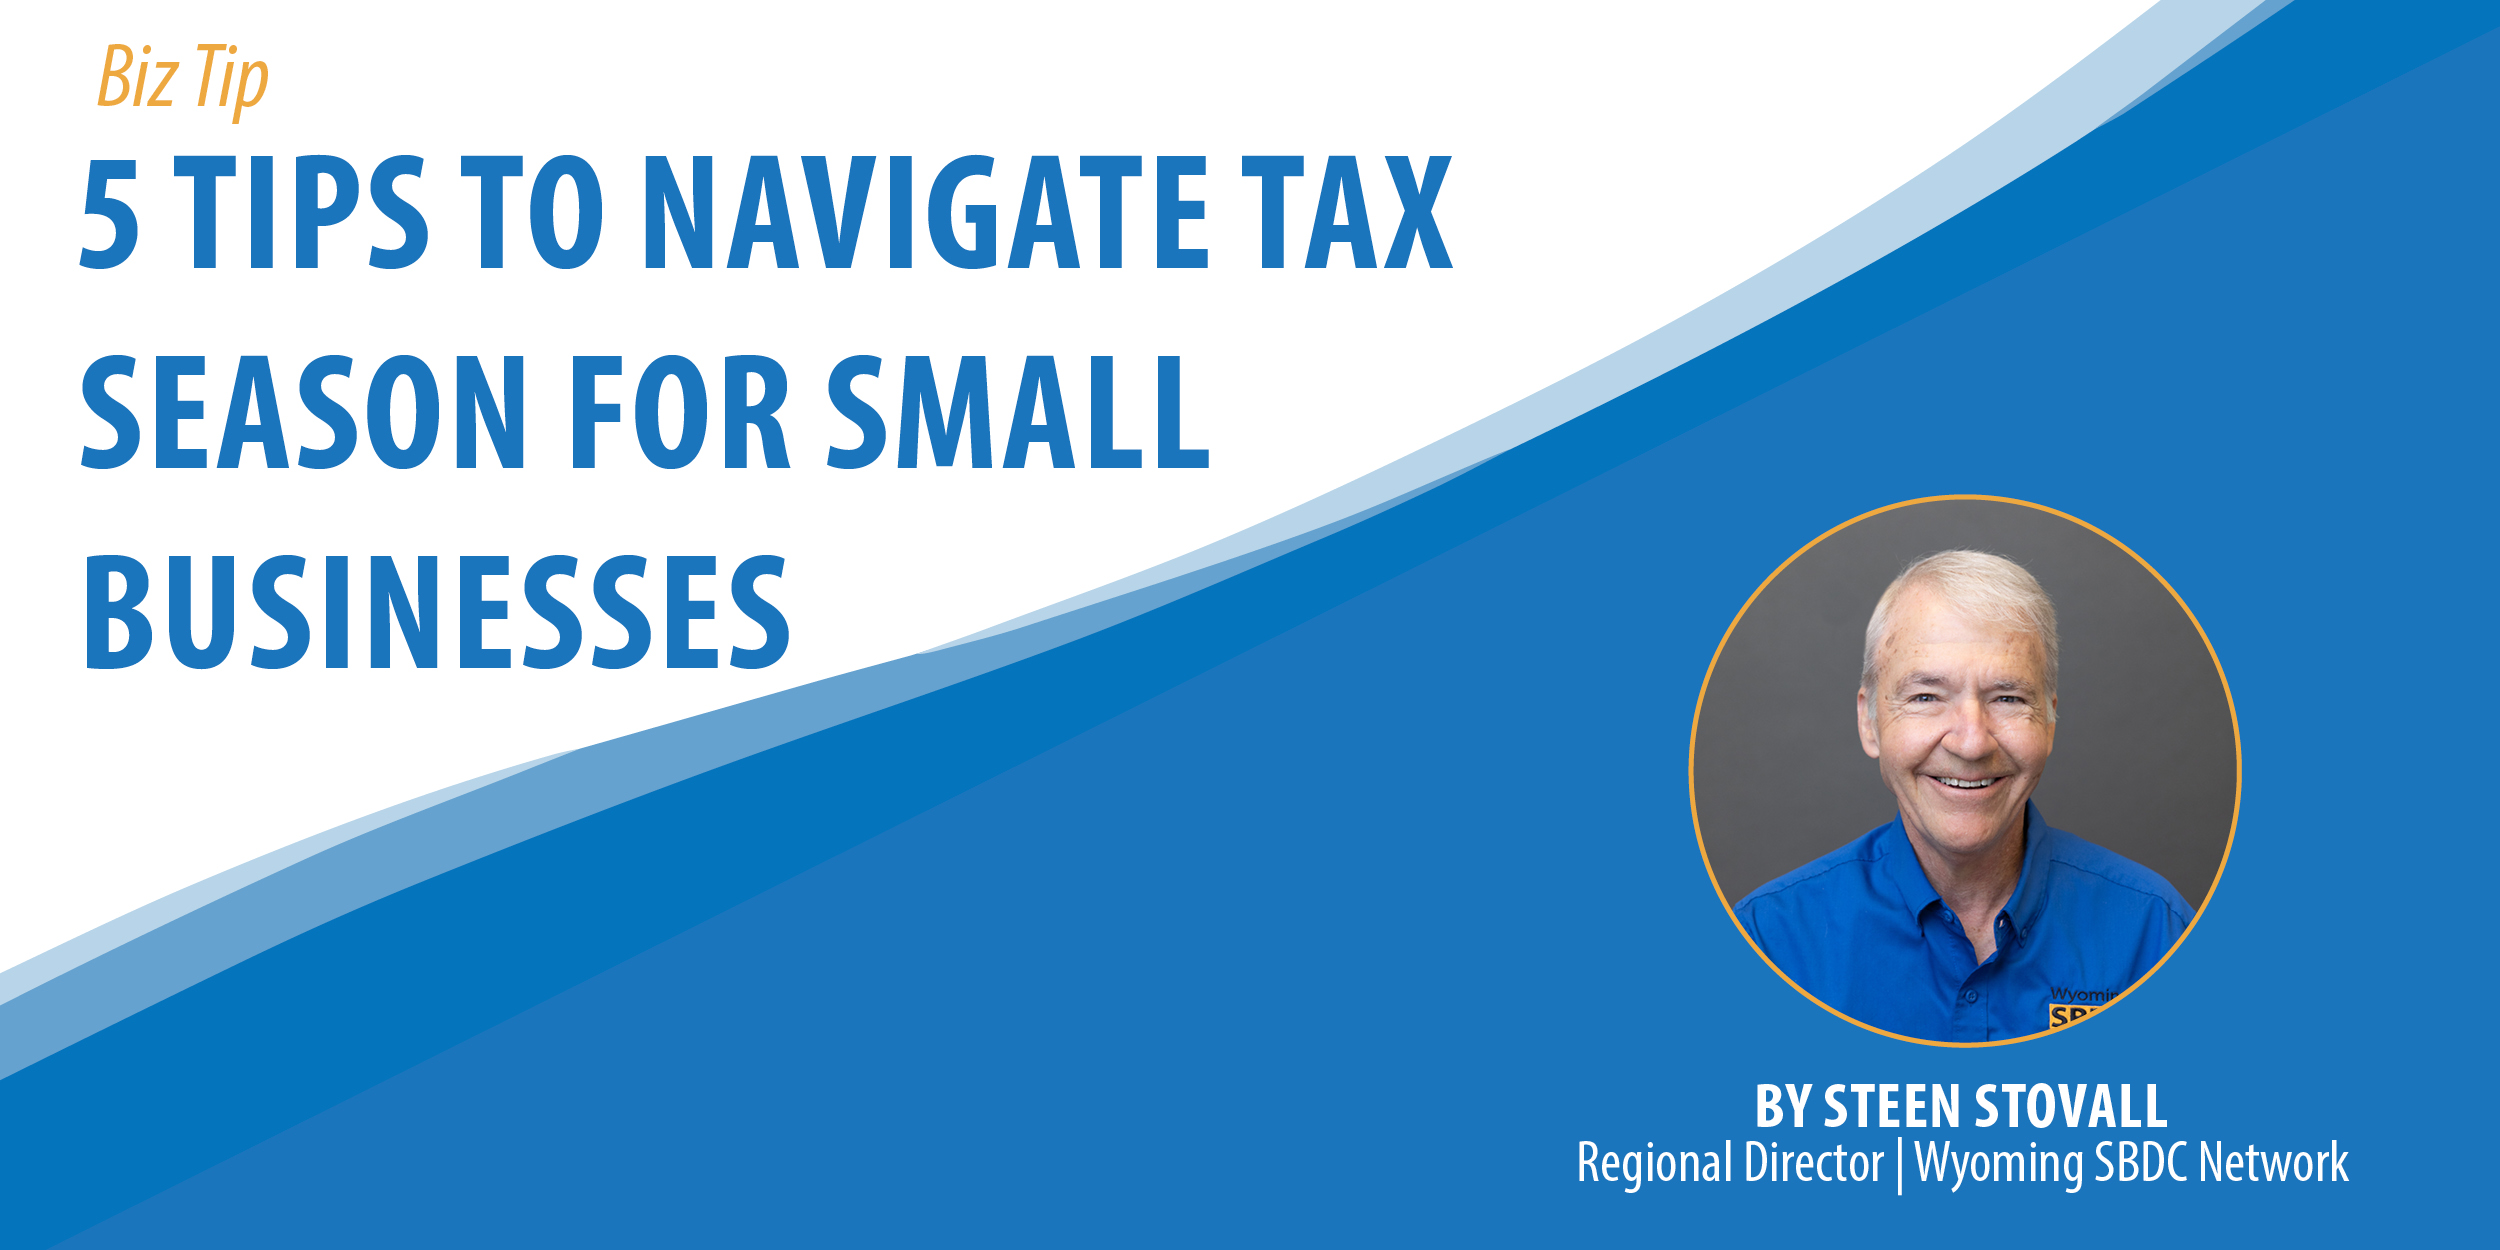 5 Tips to Navigate Tax Season for Small Businesses